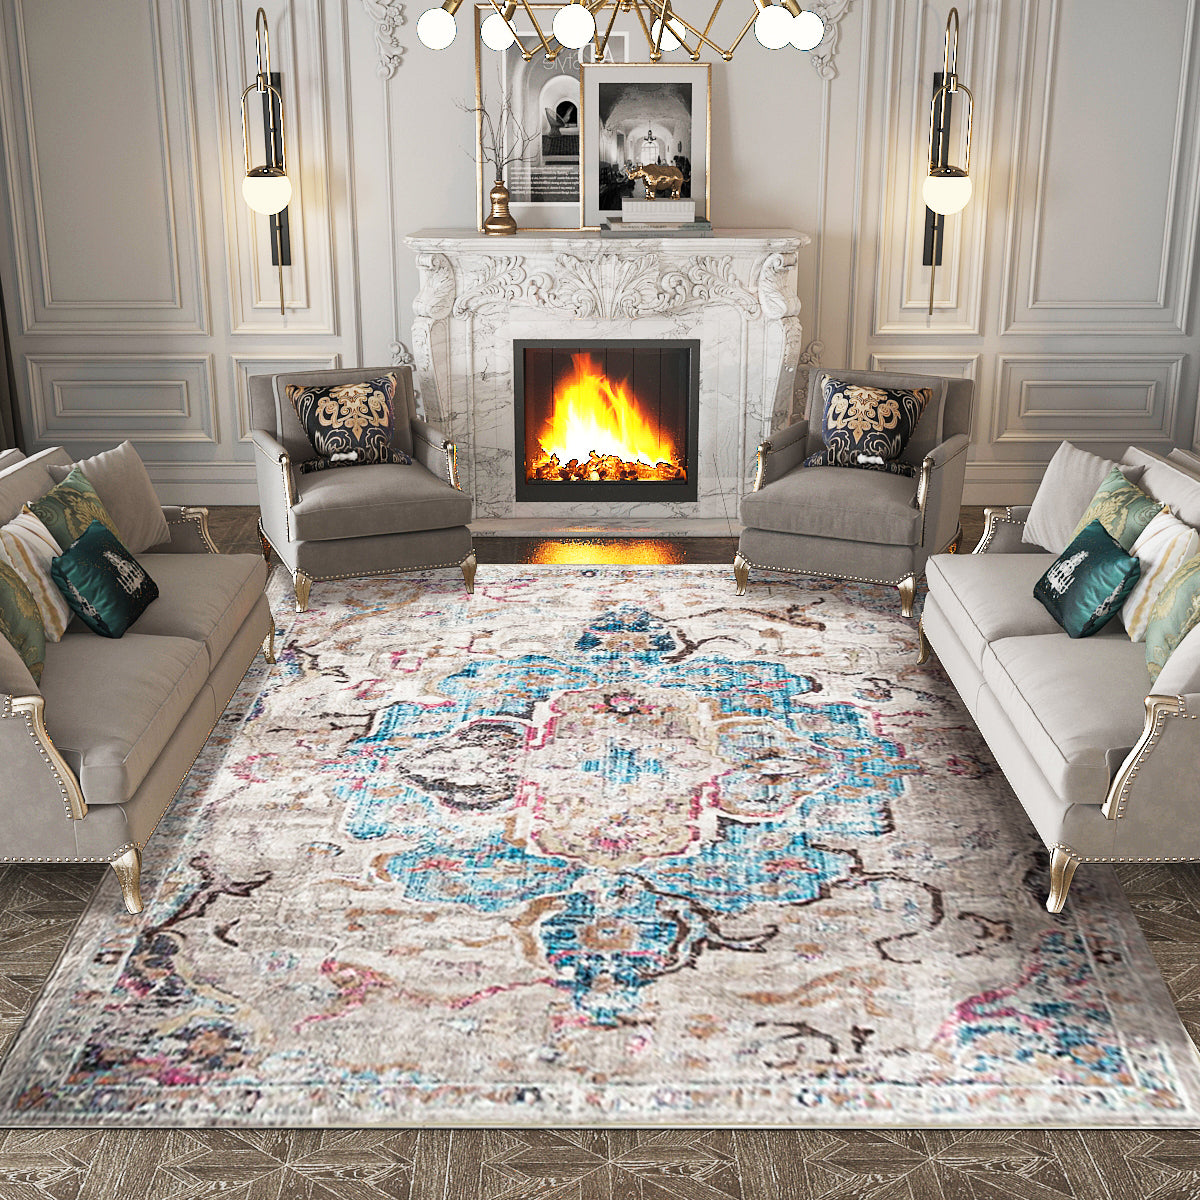 Snailhome® Area Rug Contemporary Moroccan Blythe in Light Multi Bedroom Home